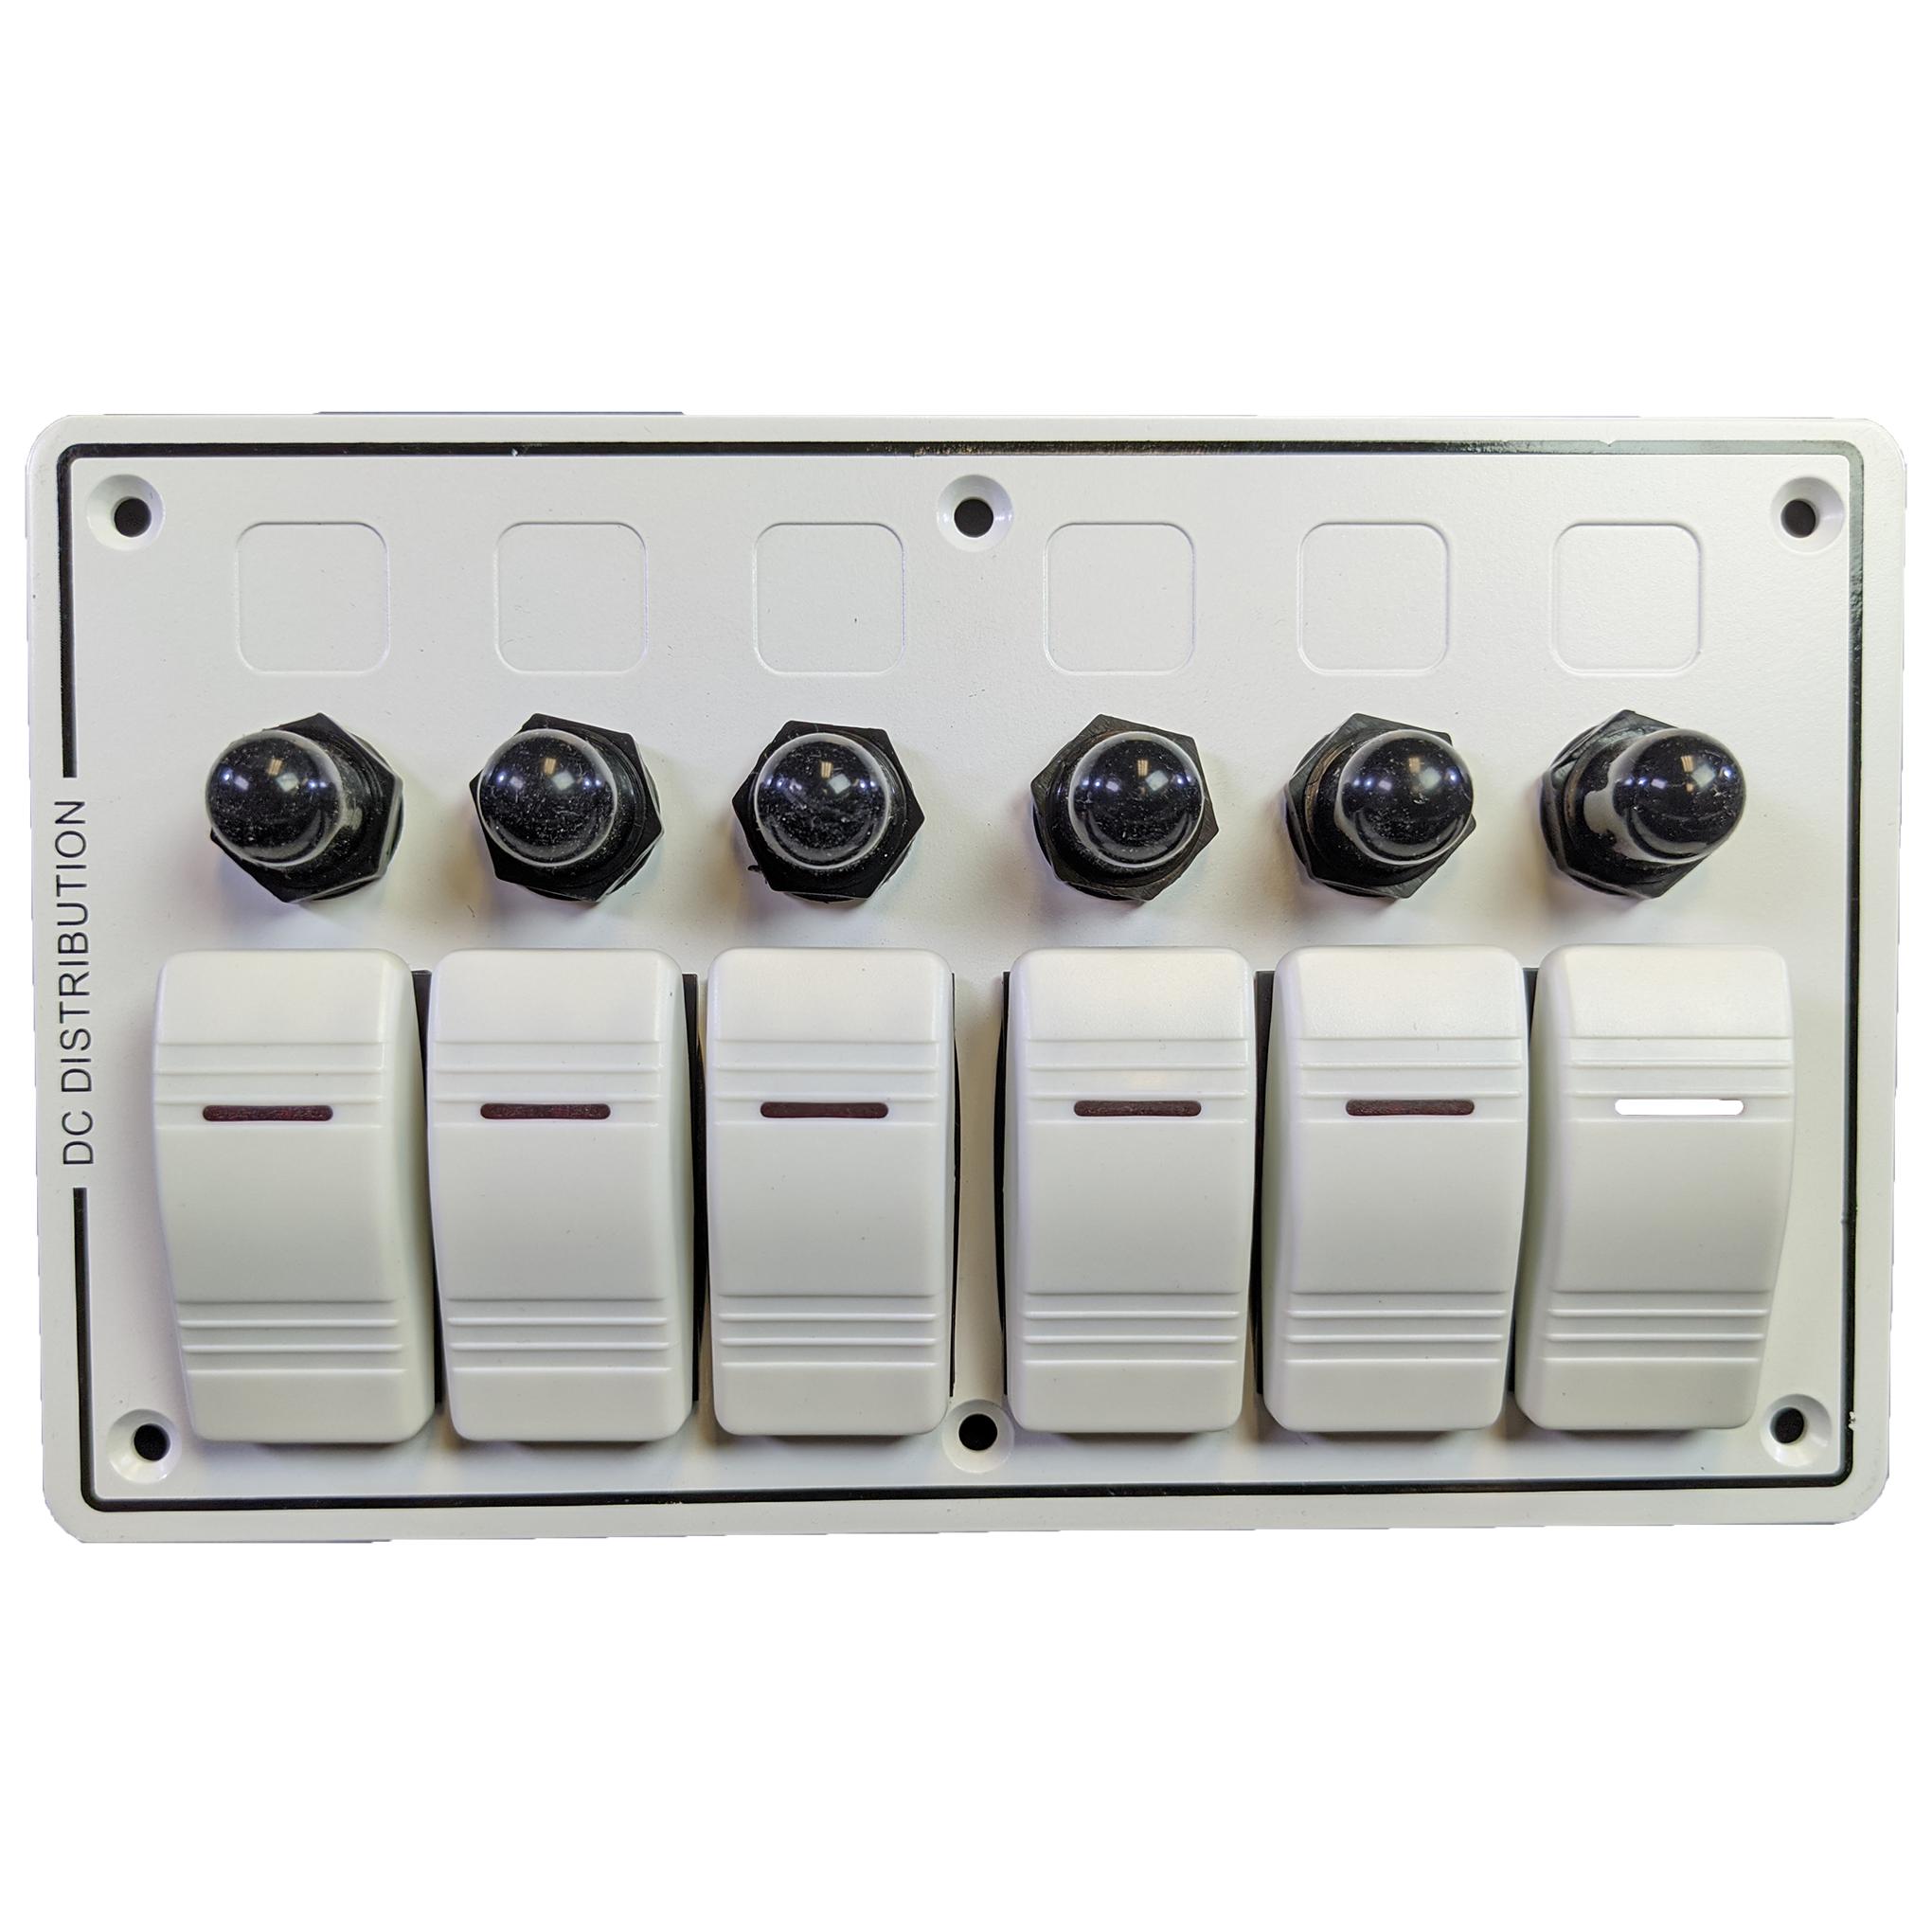 6 Switch Panel with Breakers - Marine